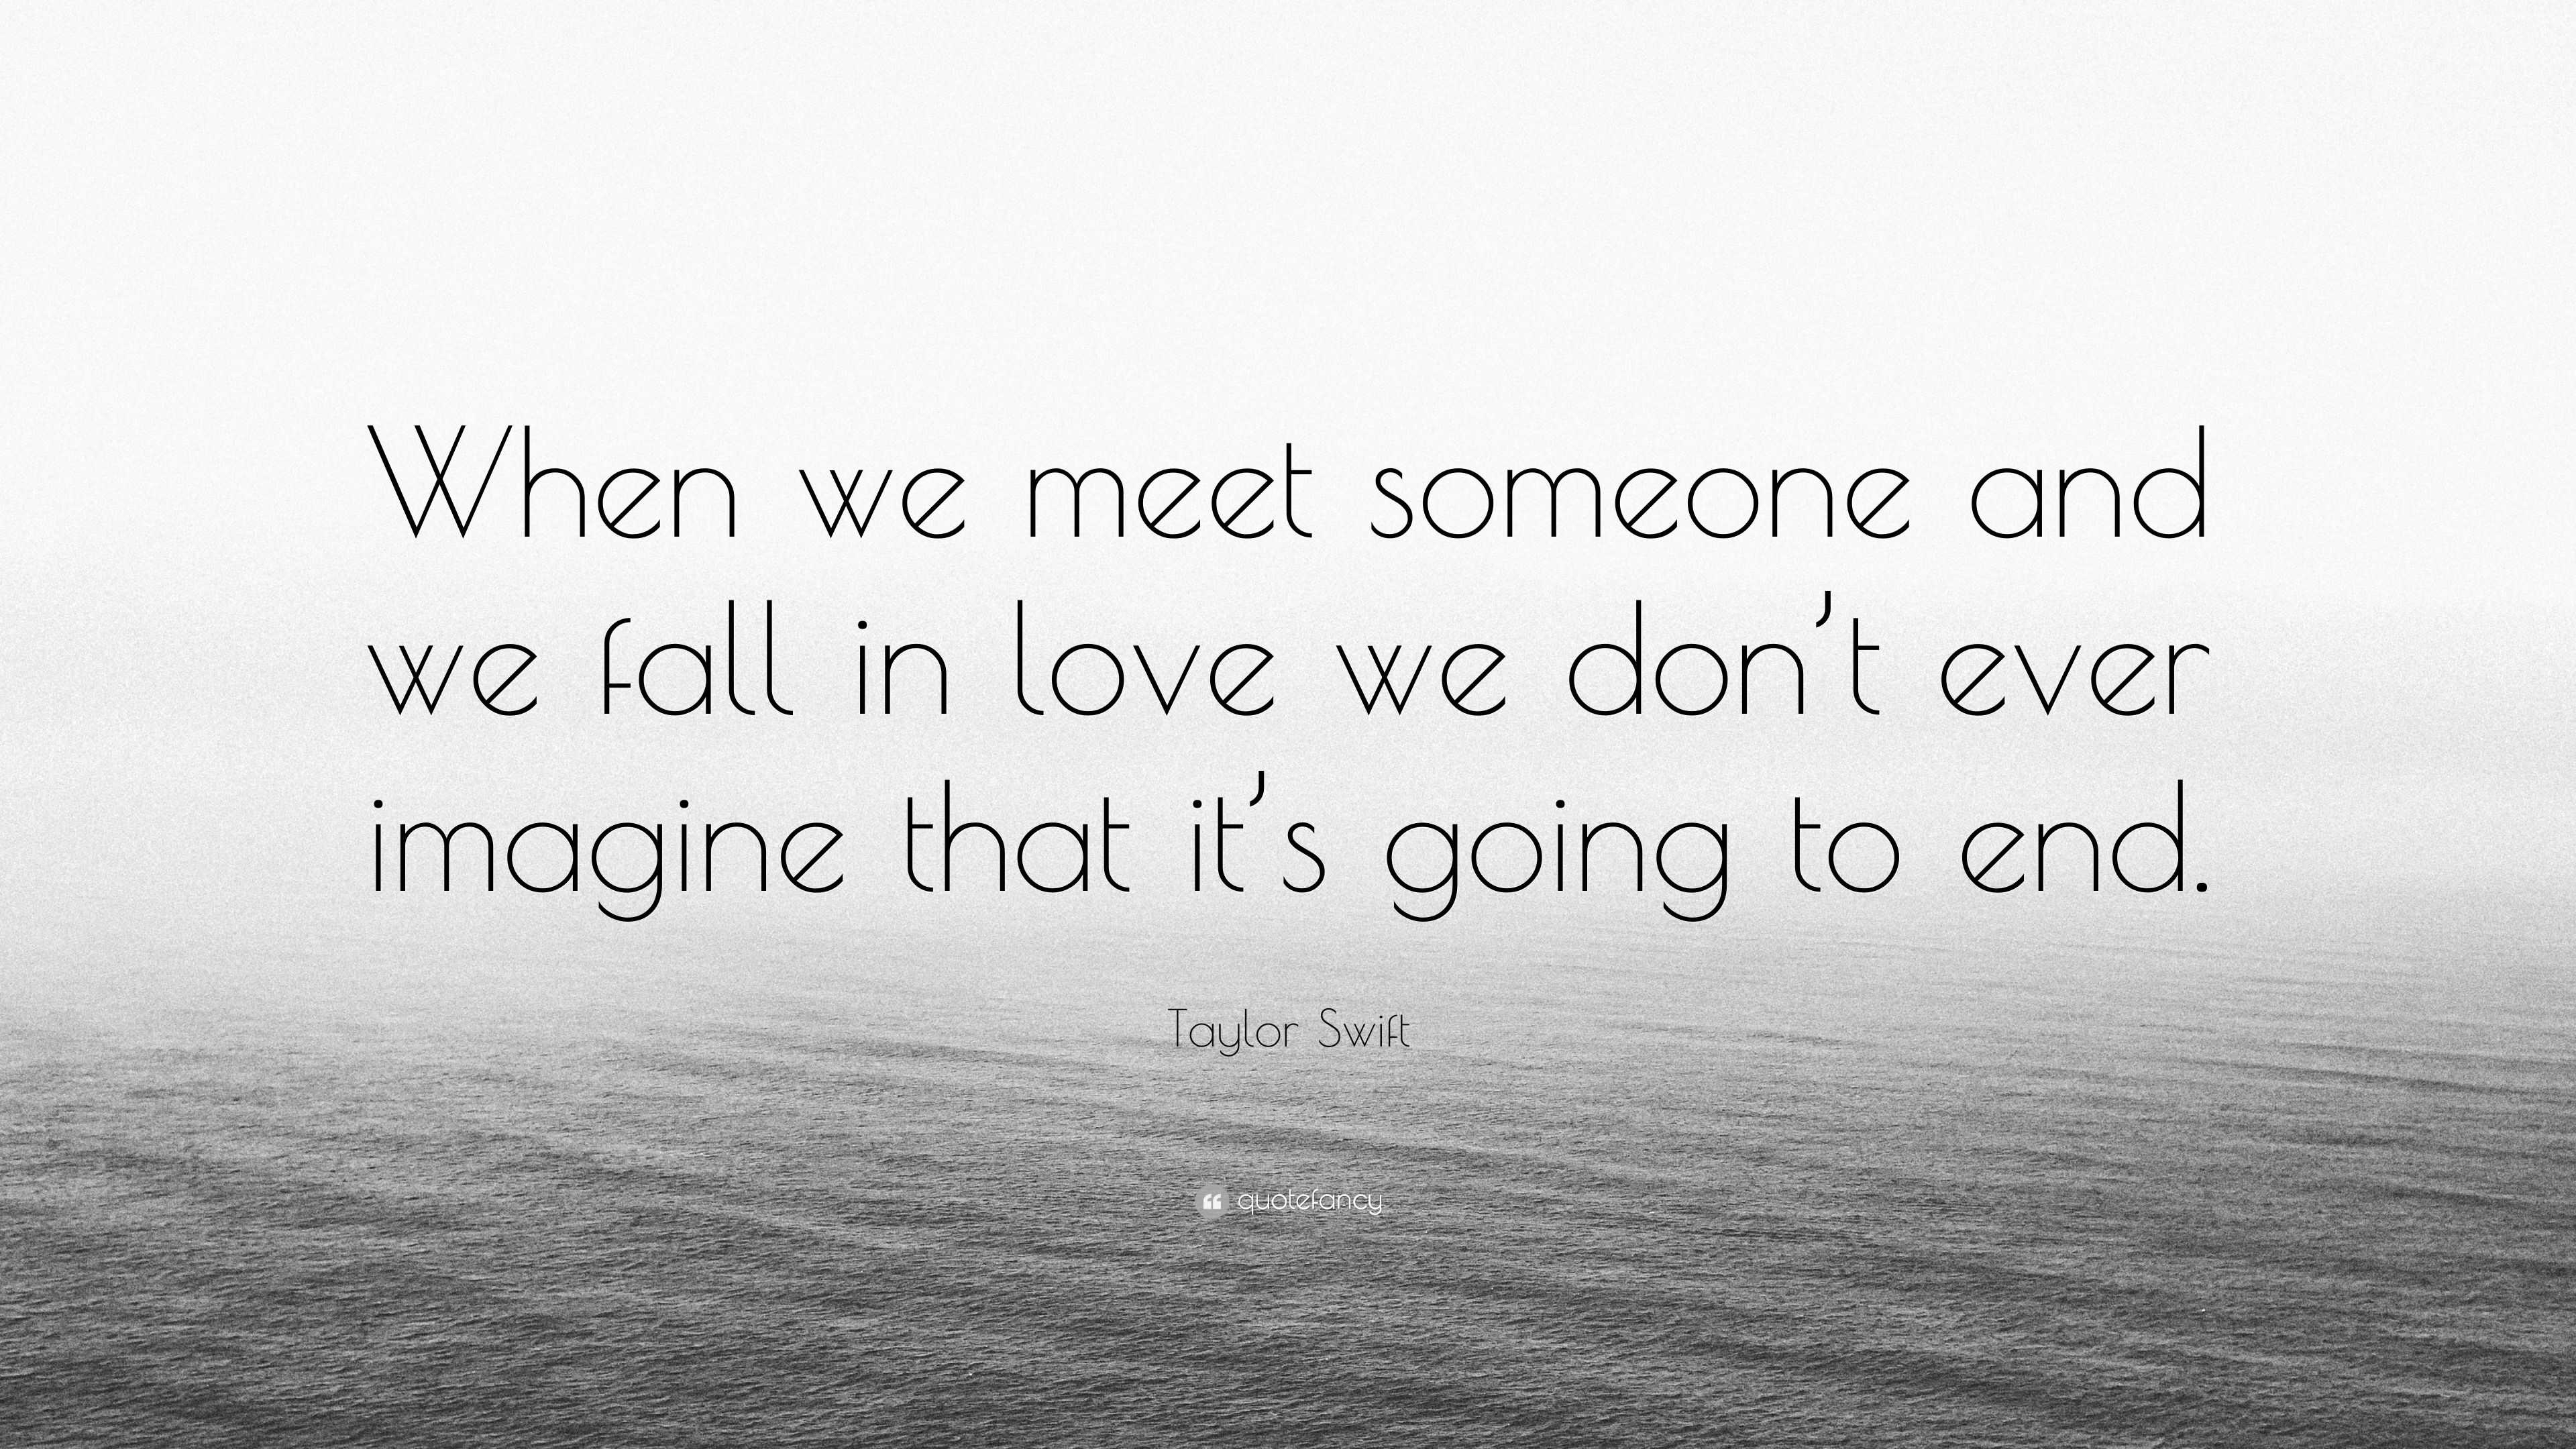 Taylor Swift Quote “When we meet someone and we fall in love we don